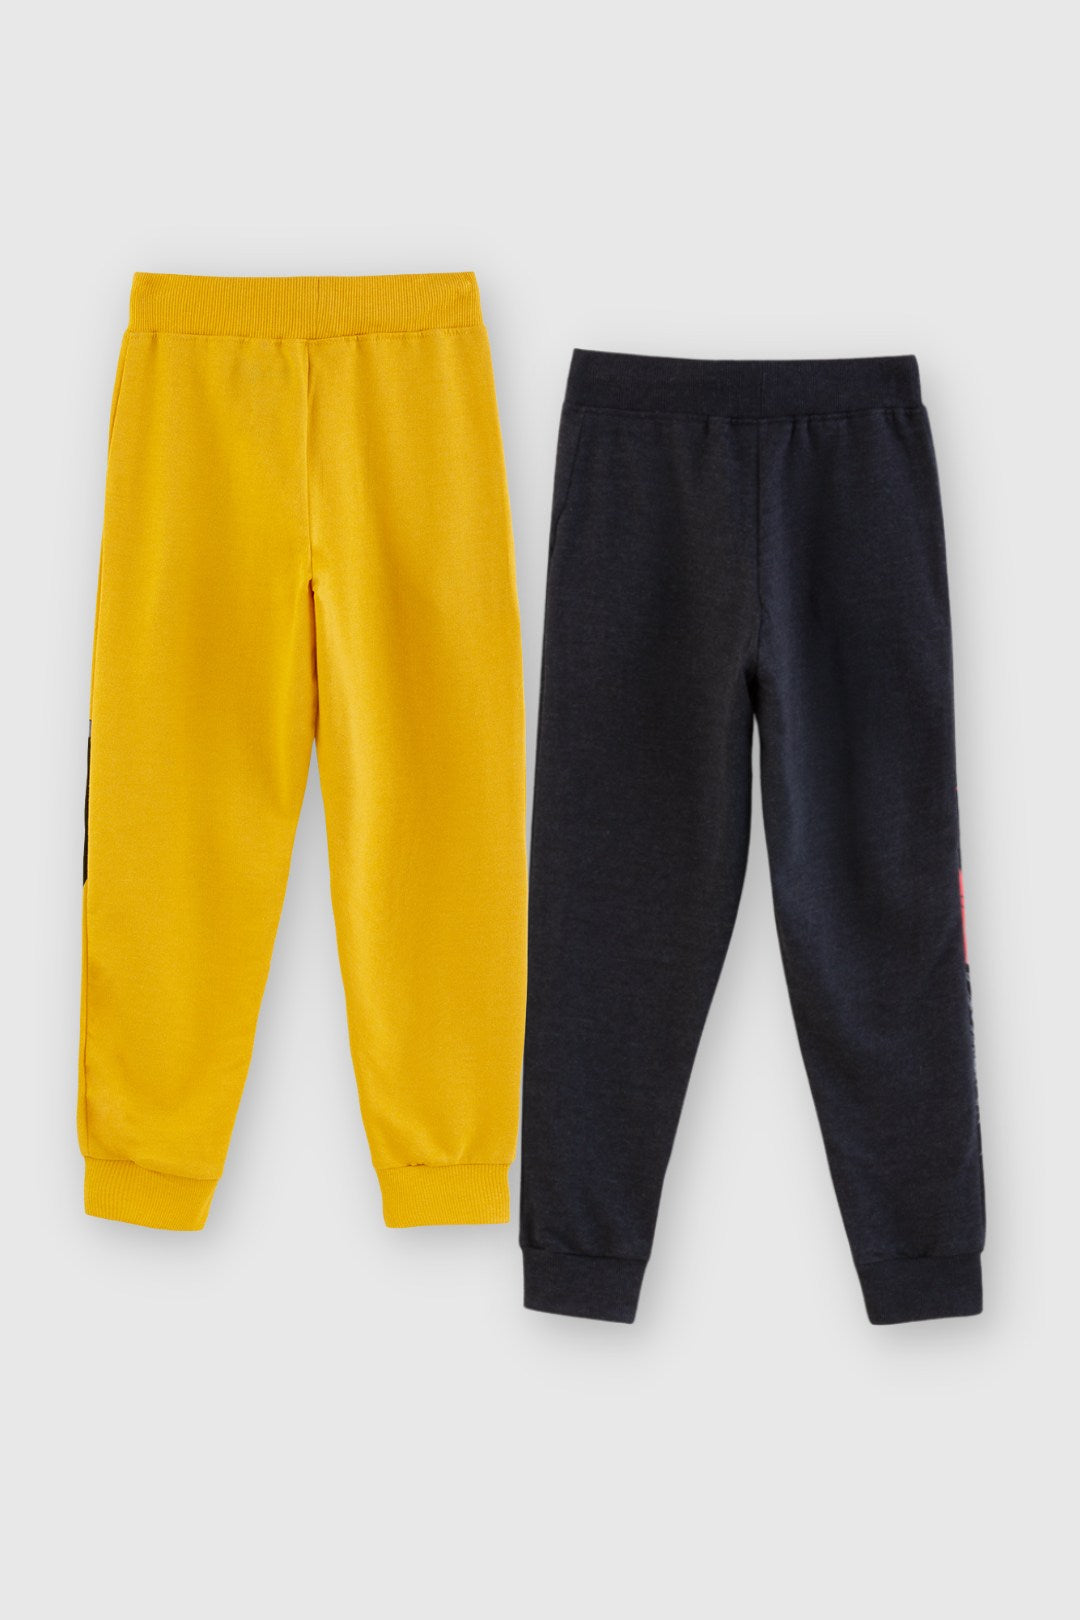 Yellow Batman and Superman Joggers Pack of 2